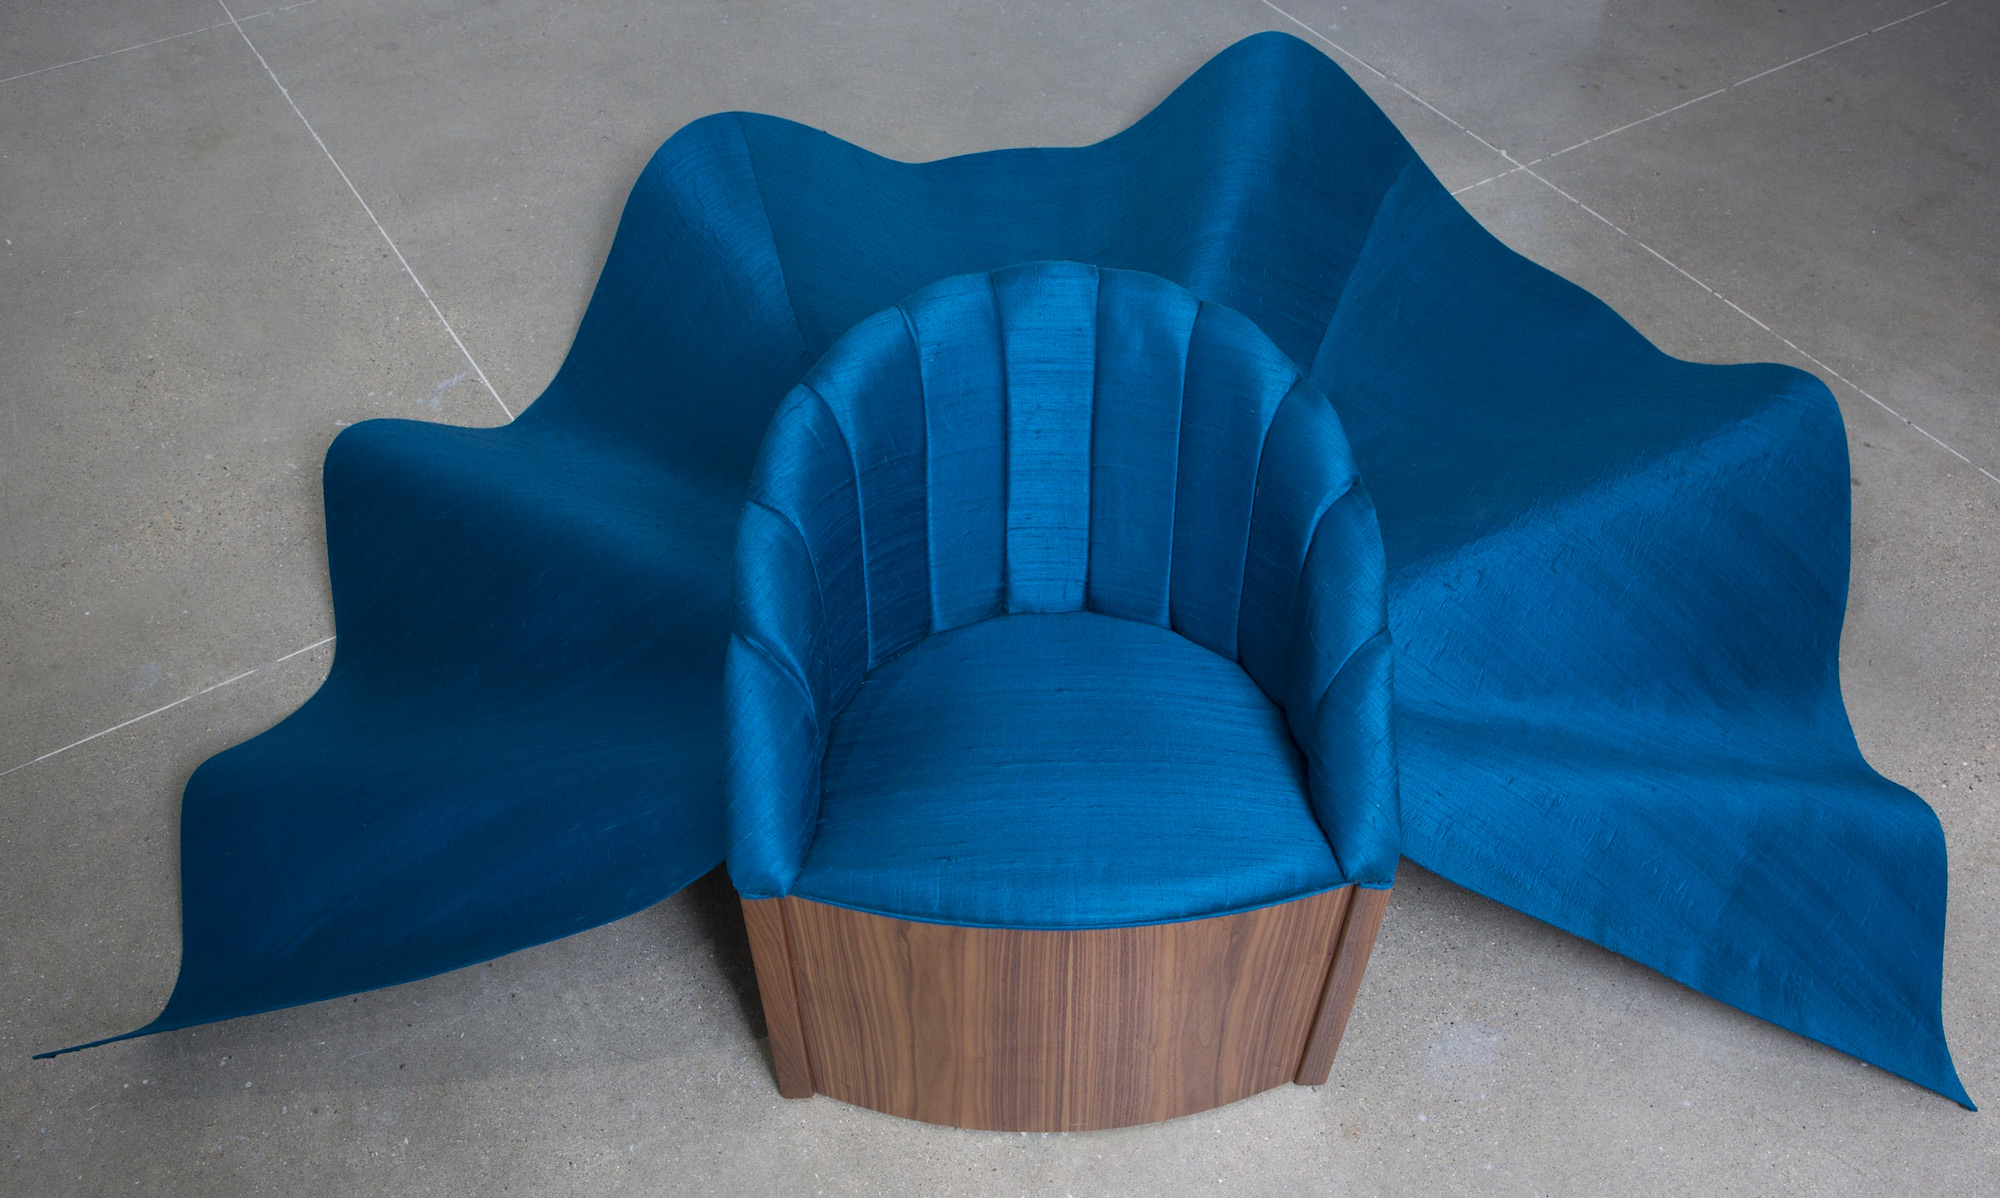 Lavishly Adorned Chairs by Annie Evelyn Reimagine the Functional Role of Furniture